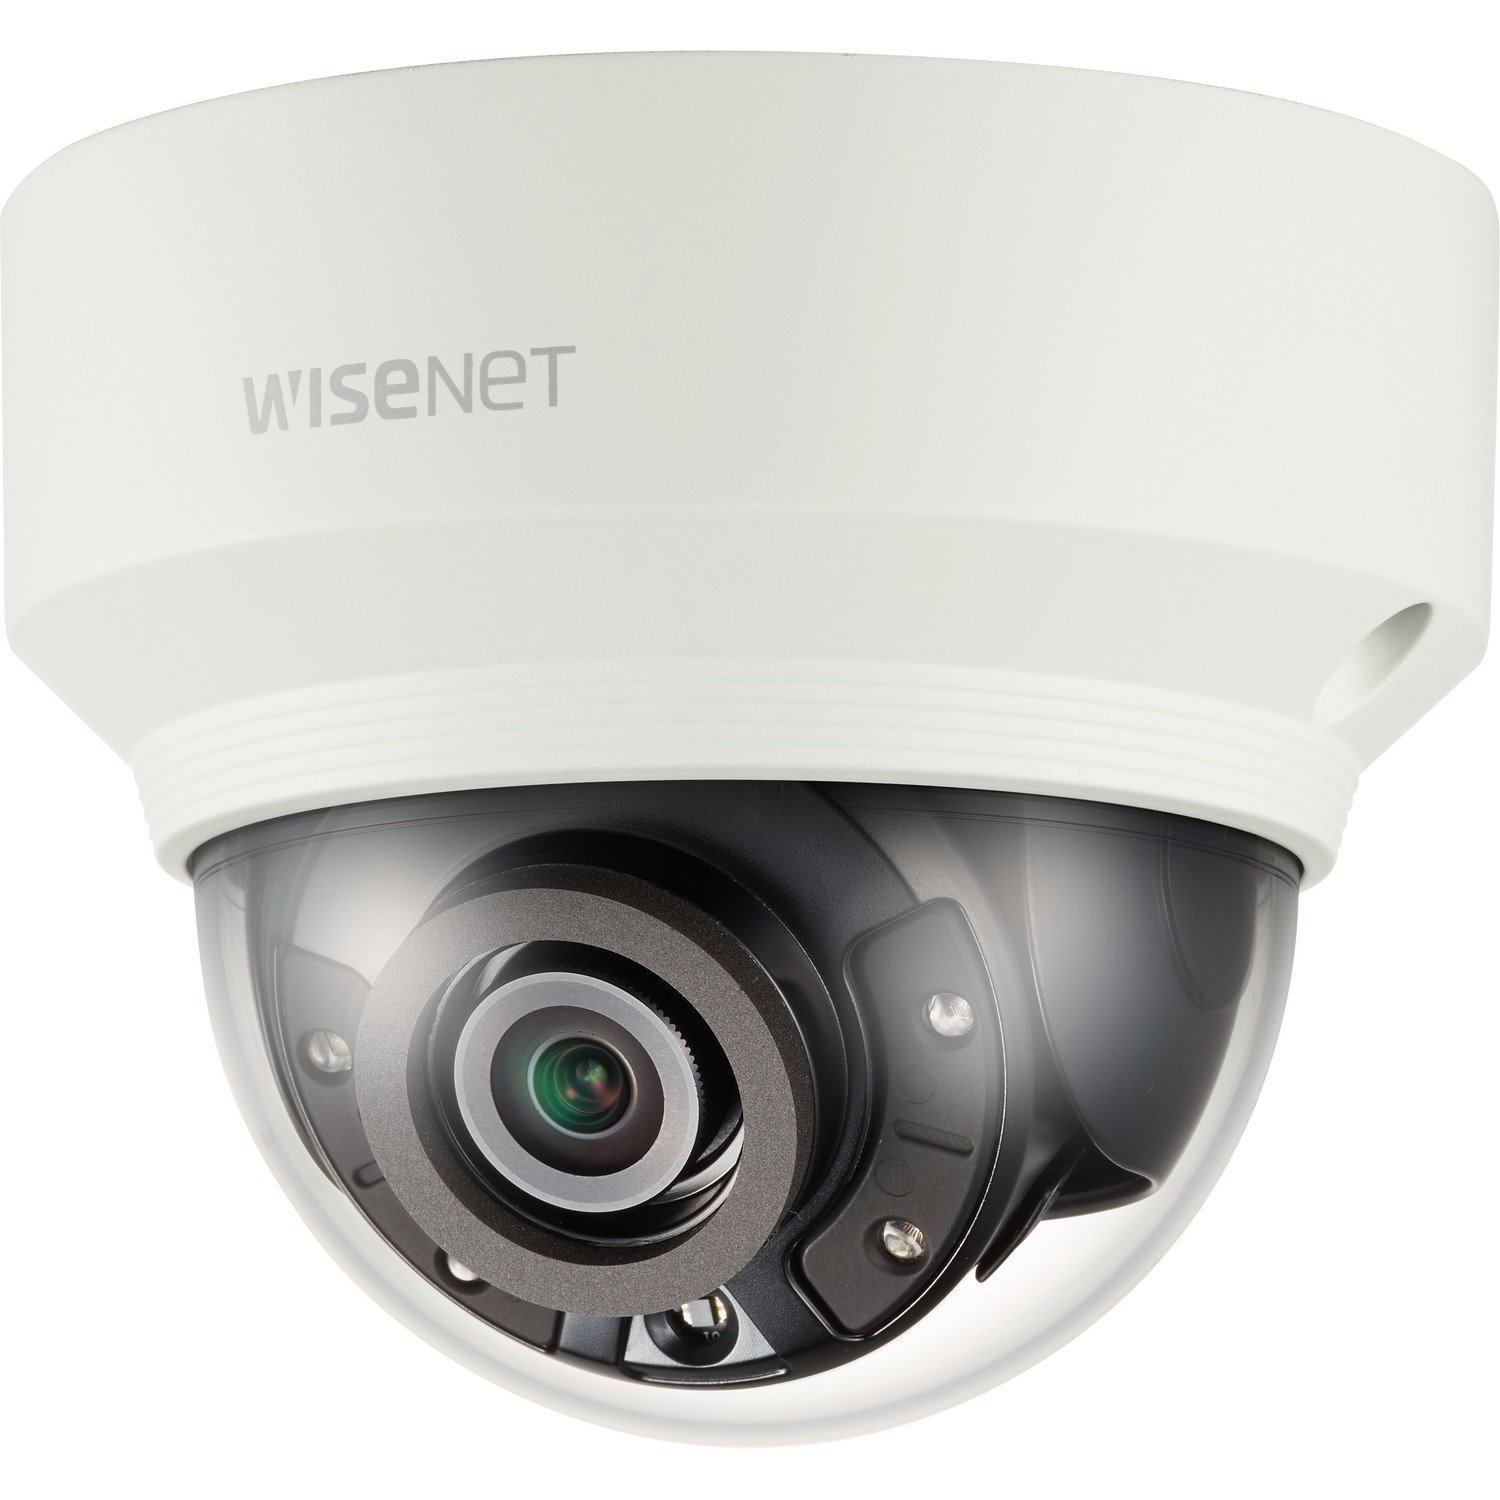 Wisenet XND-8020R 5 Megapixel Indoor HD Network Camera - Color, Monochrome - Dome